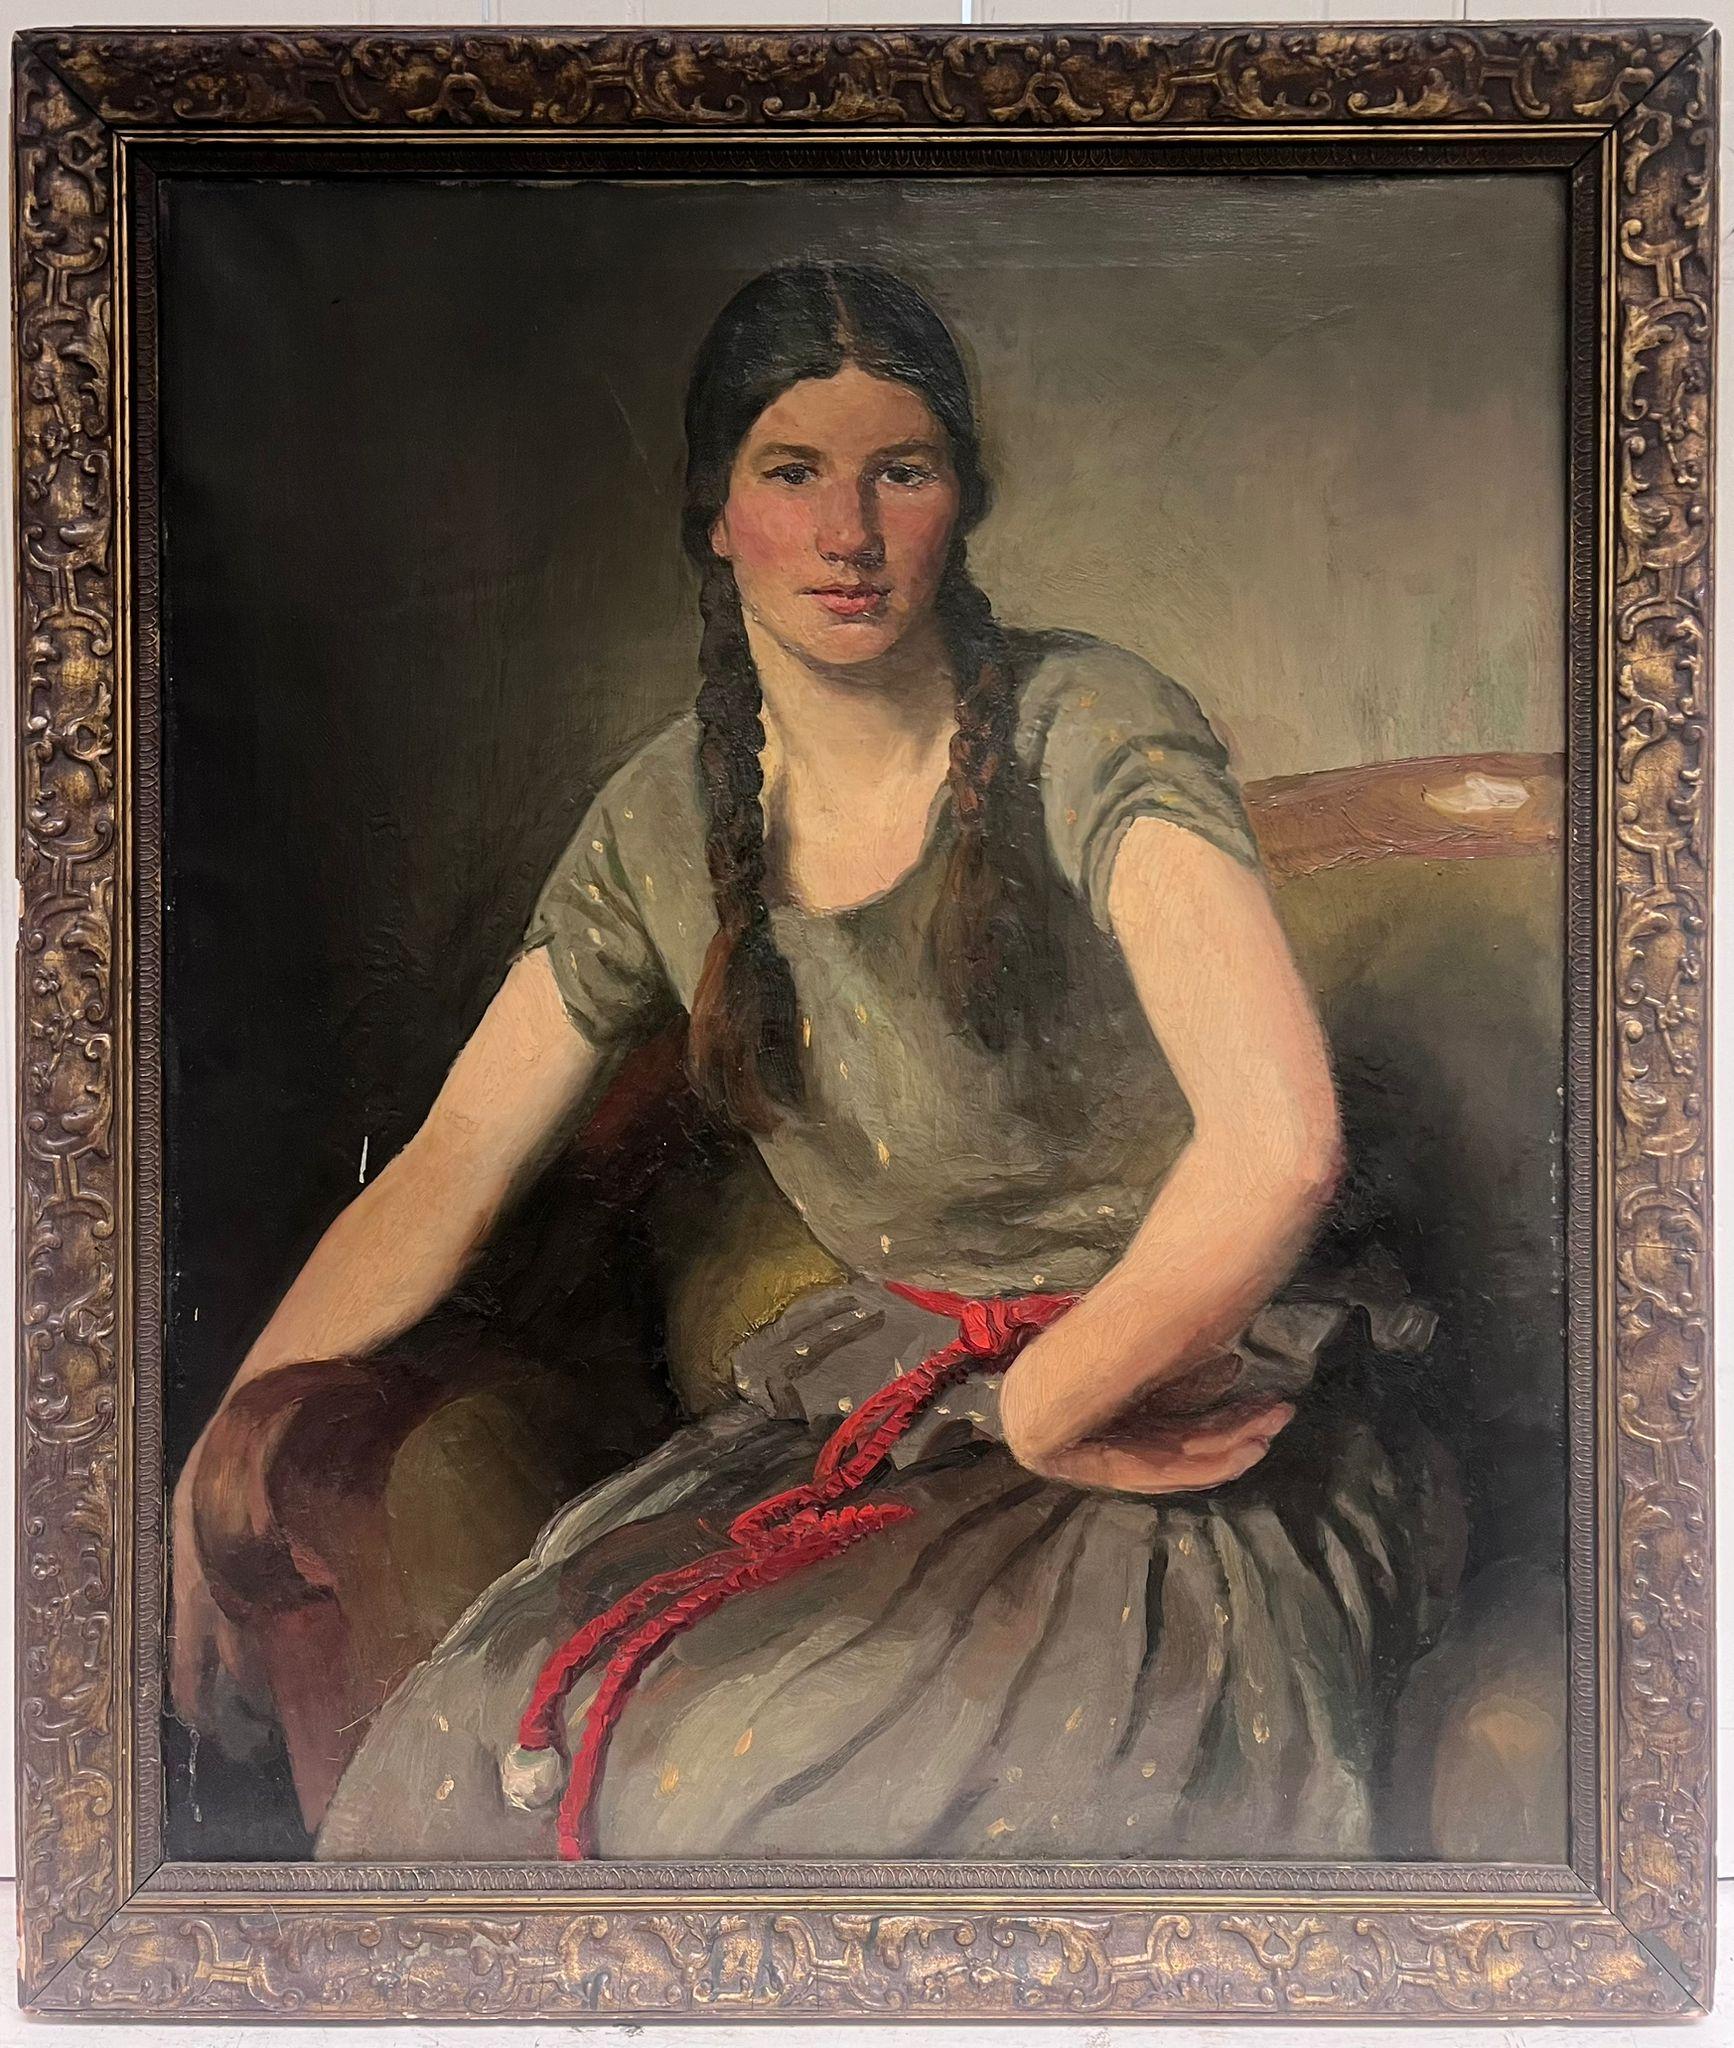 Huge Antique European Portrait of Girl with Plaits in Hair oil on canvas - Painting by European Late 19thC